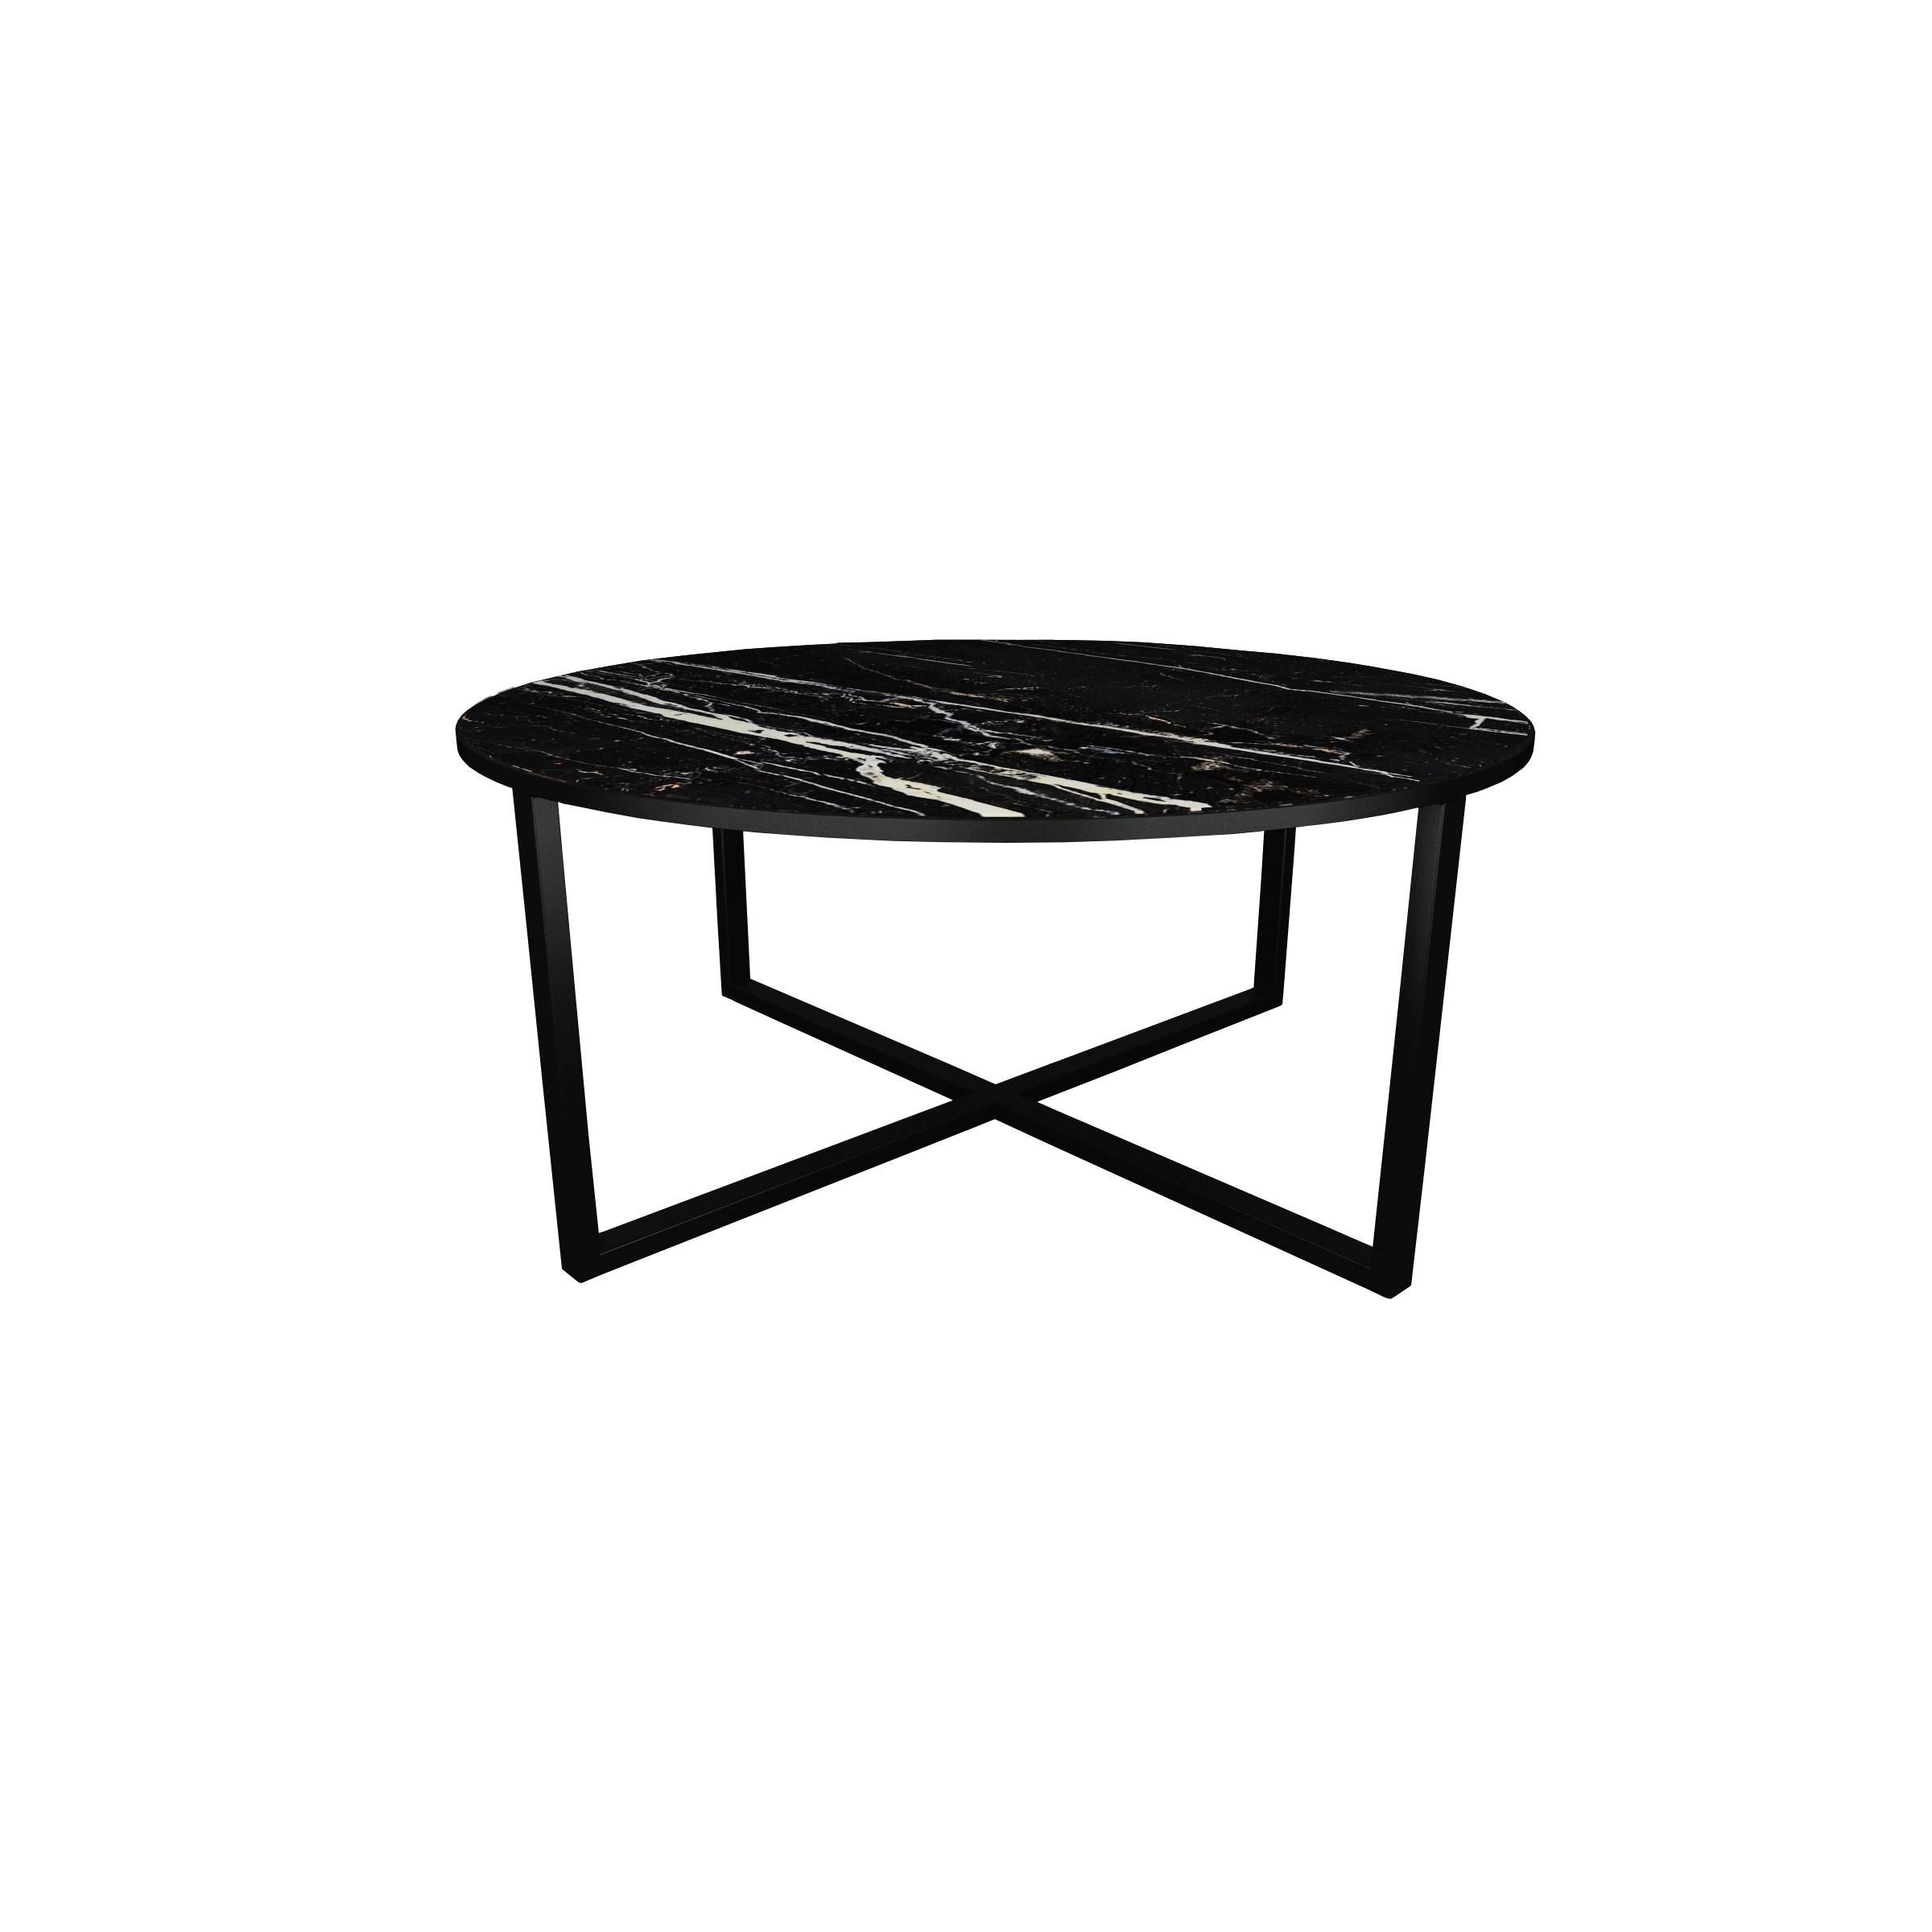 𝗣𝗿𝗼𝗱𝘂𝗰𝘁 𝗗𝗲𝘁𝗮𝗶𝗹𝘀:
NORDST MIA Coffee Round Table from Italian White Mountain Marble, Danish Modern Design, New

Cross-style frame going up to meet a marvellous and carefully selected marble piece that has been surrounded by the stylish